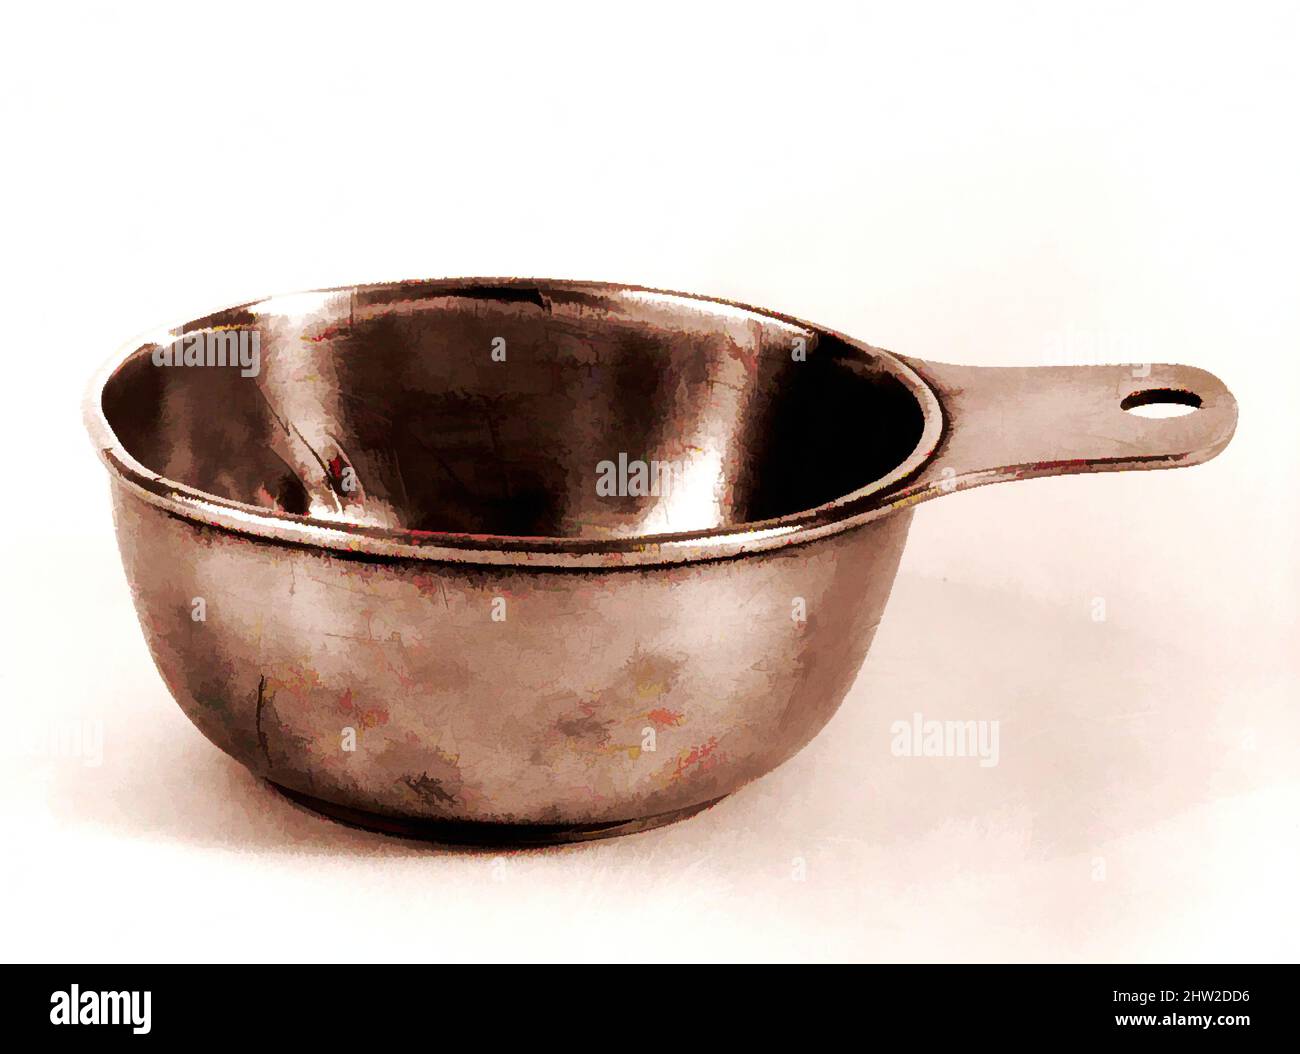 Art inspired by Porringer, ca. 1800, Made in Westtown, Pennsylvania, United States, American, Pewter, 2 3/8 x 7 1/8 x 5 3/8 in. (6 x 18.1 x 13.7 cm), Metal, Possibly Samuel Pennock (1754–ca3, Classic works modernized by Artotop with a splash of modernity. Shapes, color and value, eye-catching visual impact on art. Emotions through freedom of artworks in a contemporary way. A timeless message pursuing a wildly creative new direction. Artists turning to the digital medium and creating the Artotop NFT Stock Photo